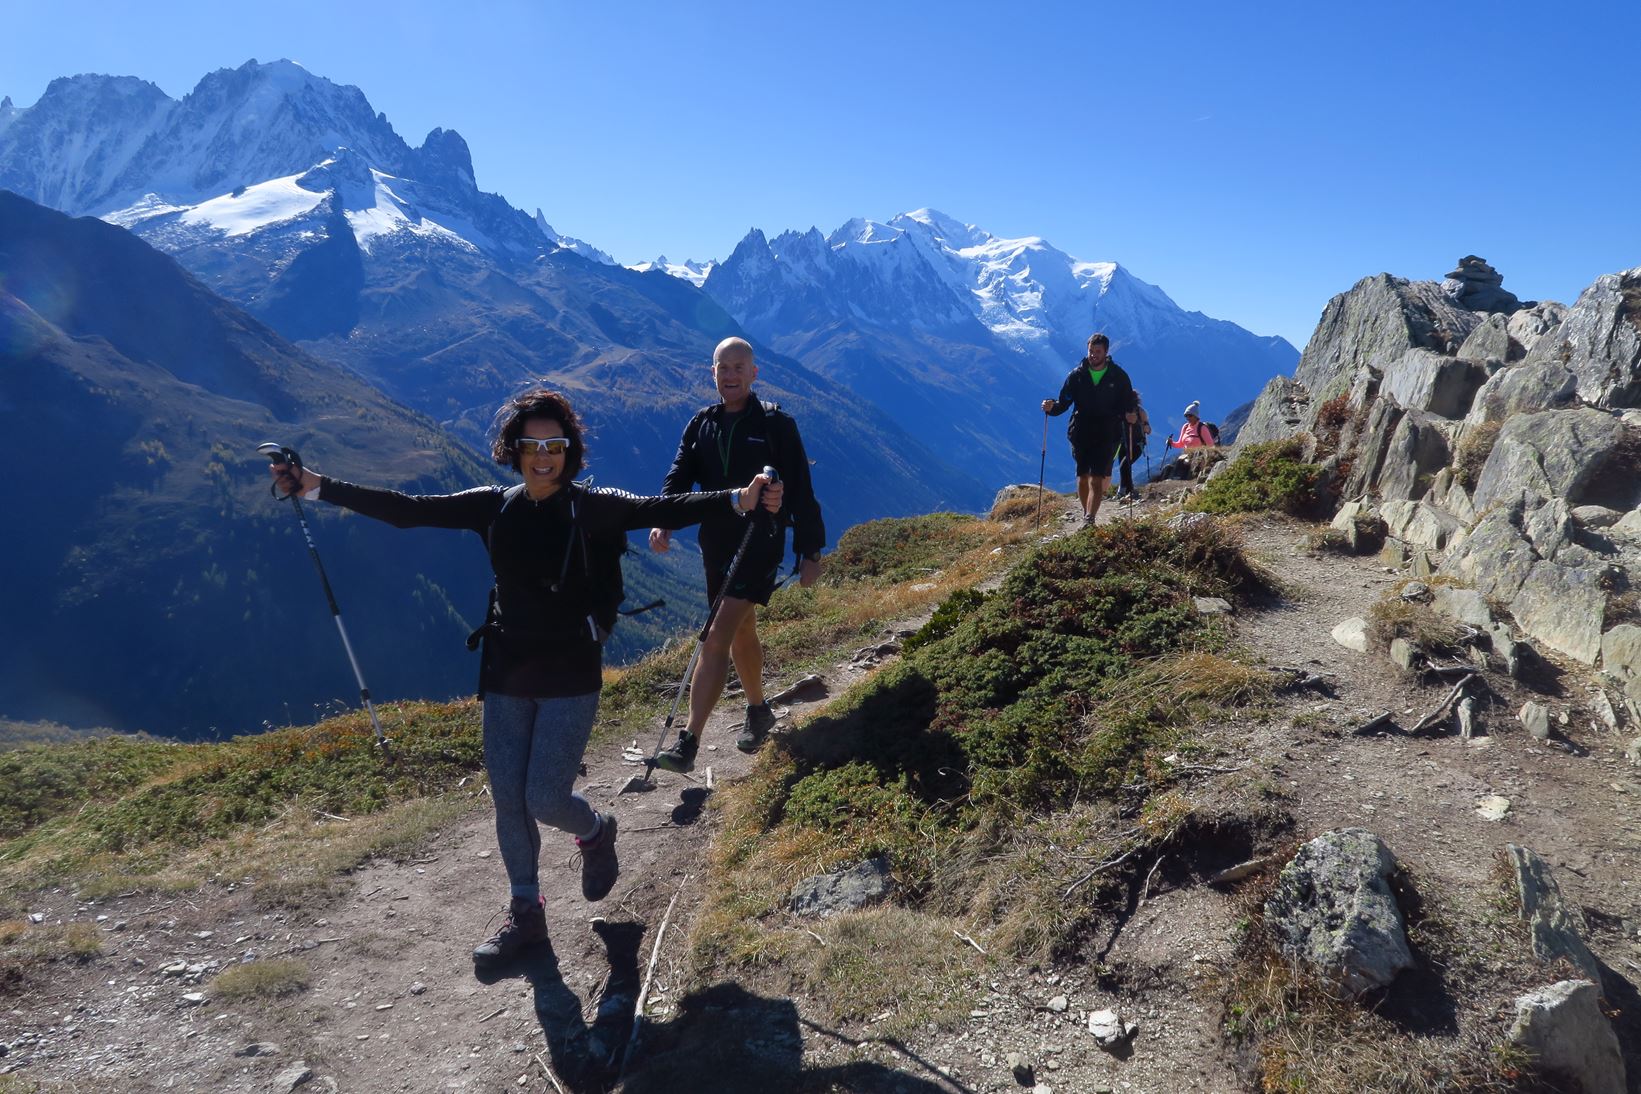 Walkers smiling at the camera, surrounded by the Alpes and blue skies.